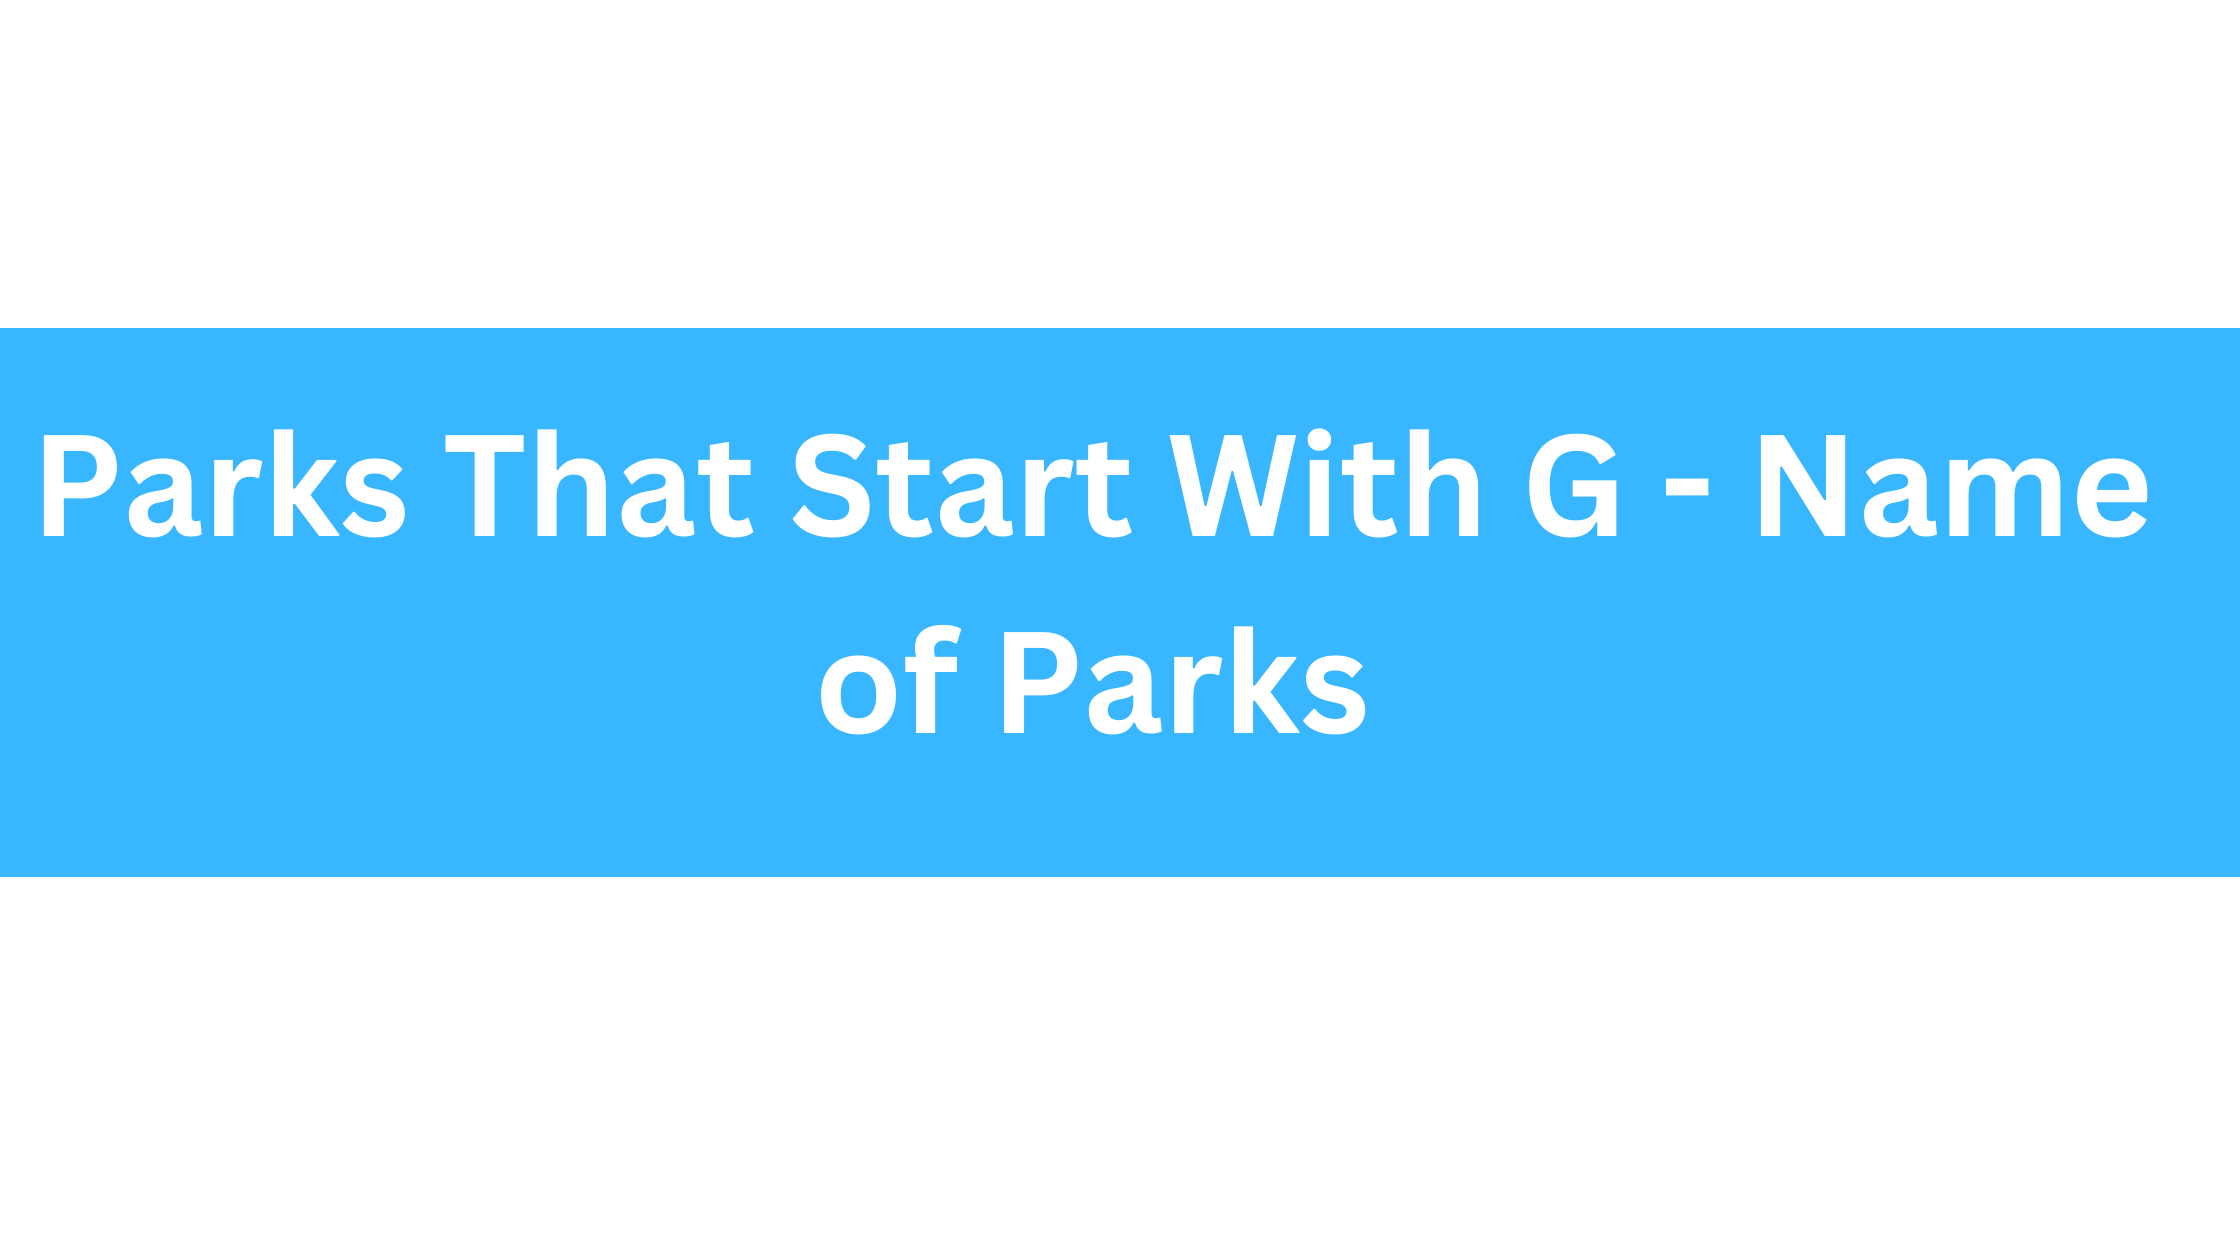 Parks That Start With G